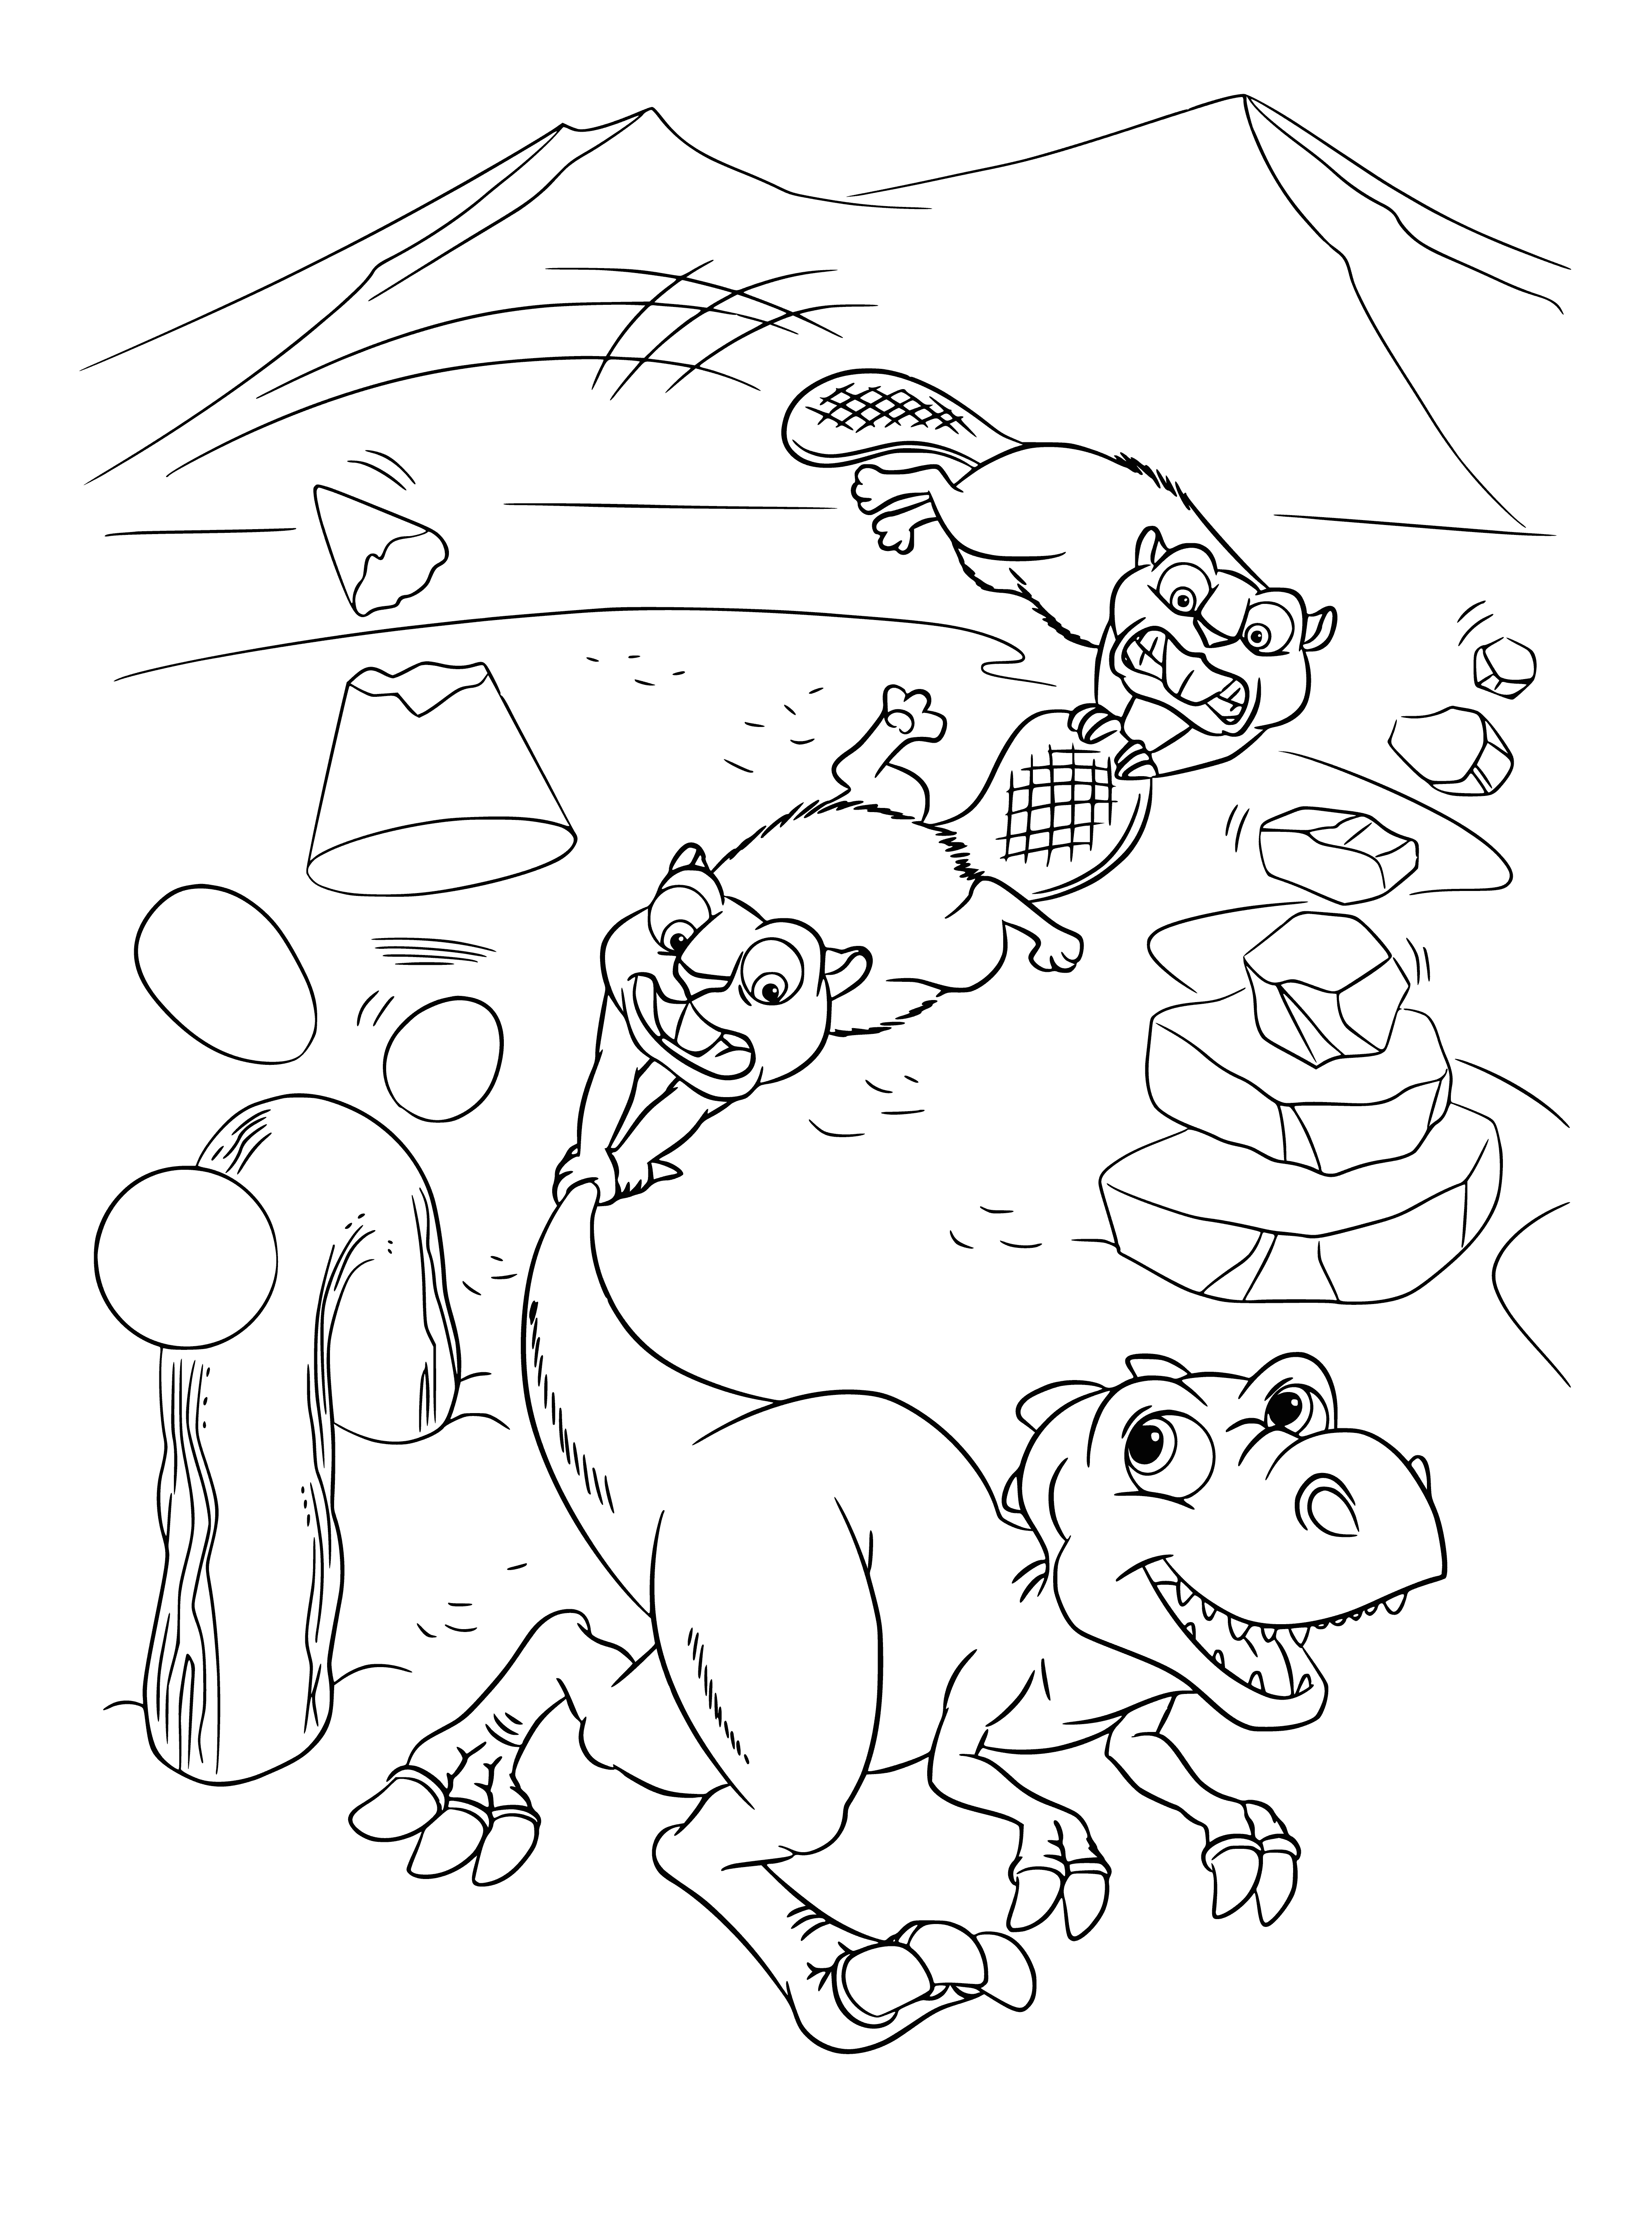 coloring page: Beaver frantically paddles away from a looming dinosaur in Ice Age: Dawn of the Dinosaurs - a fun coloring page to print.